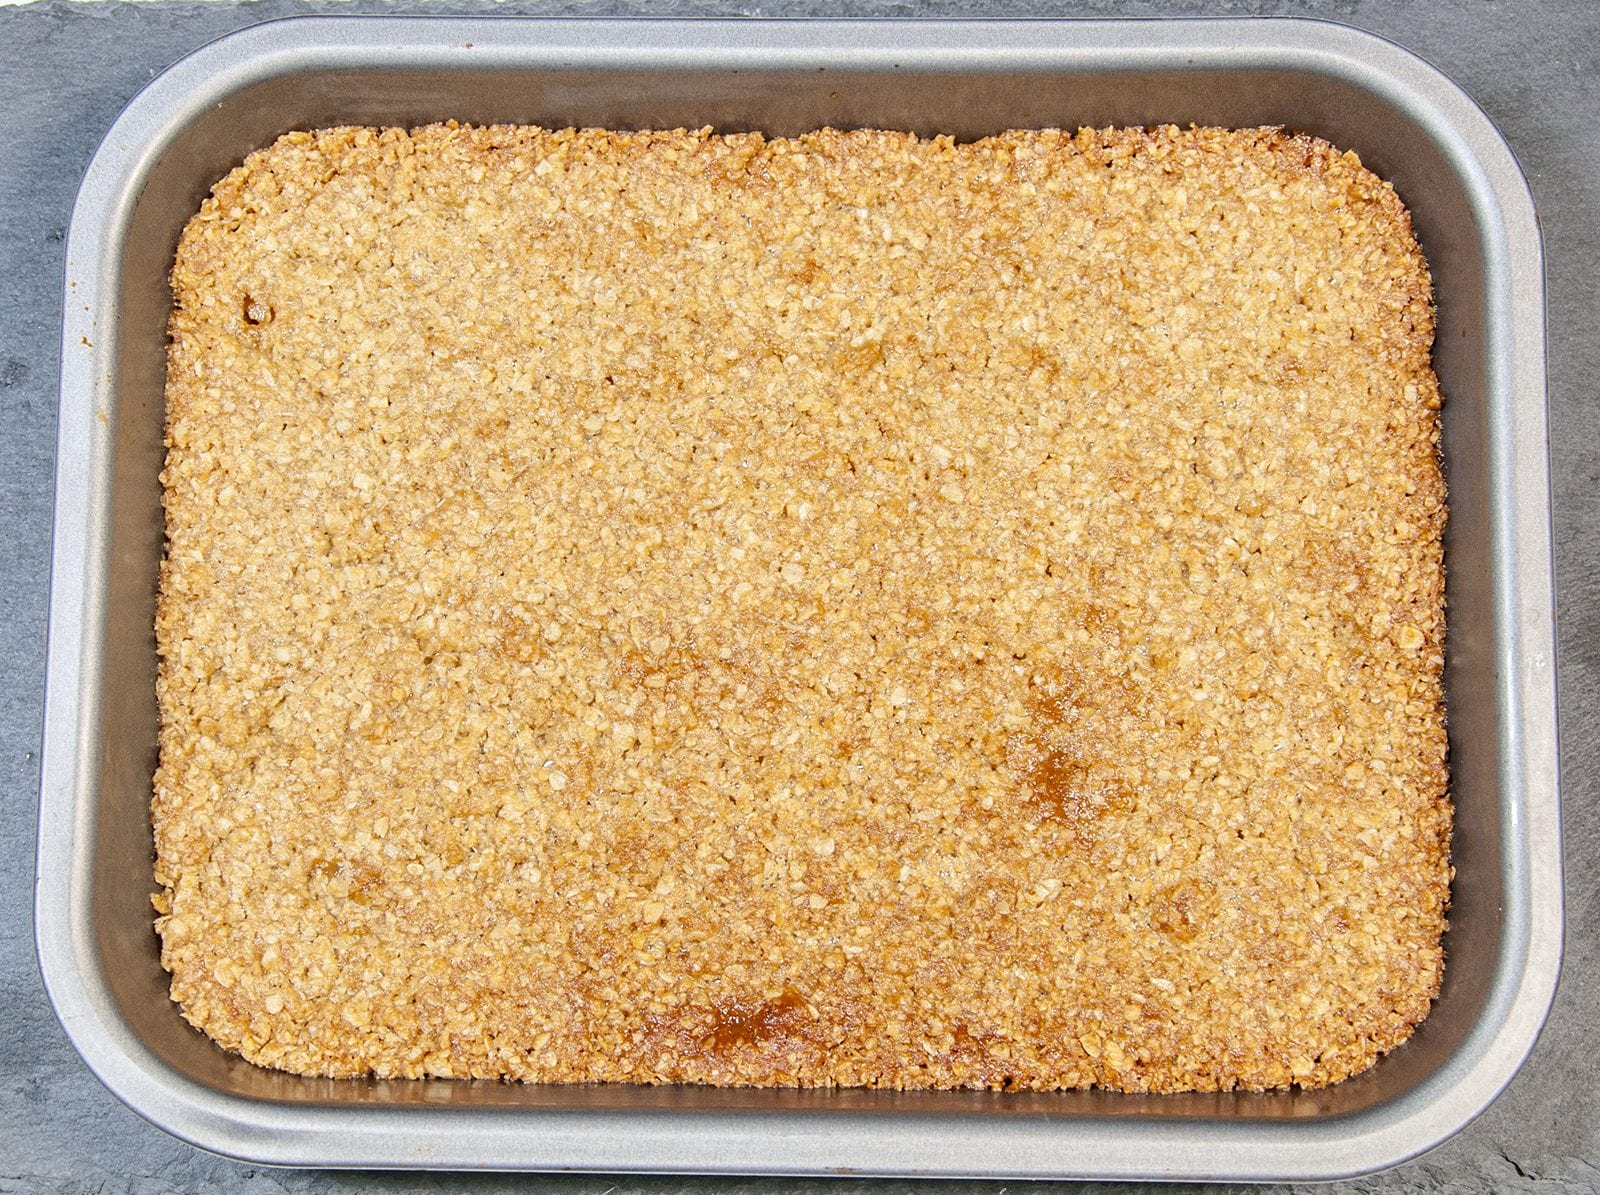 Bake for 20 minutes | https://theyumyumclub.com/2019/06/01/extra-soft-and-chewy-flapjacks/